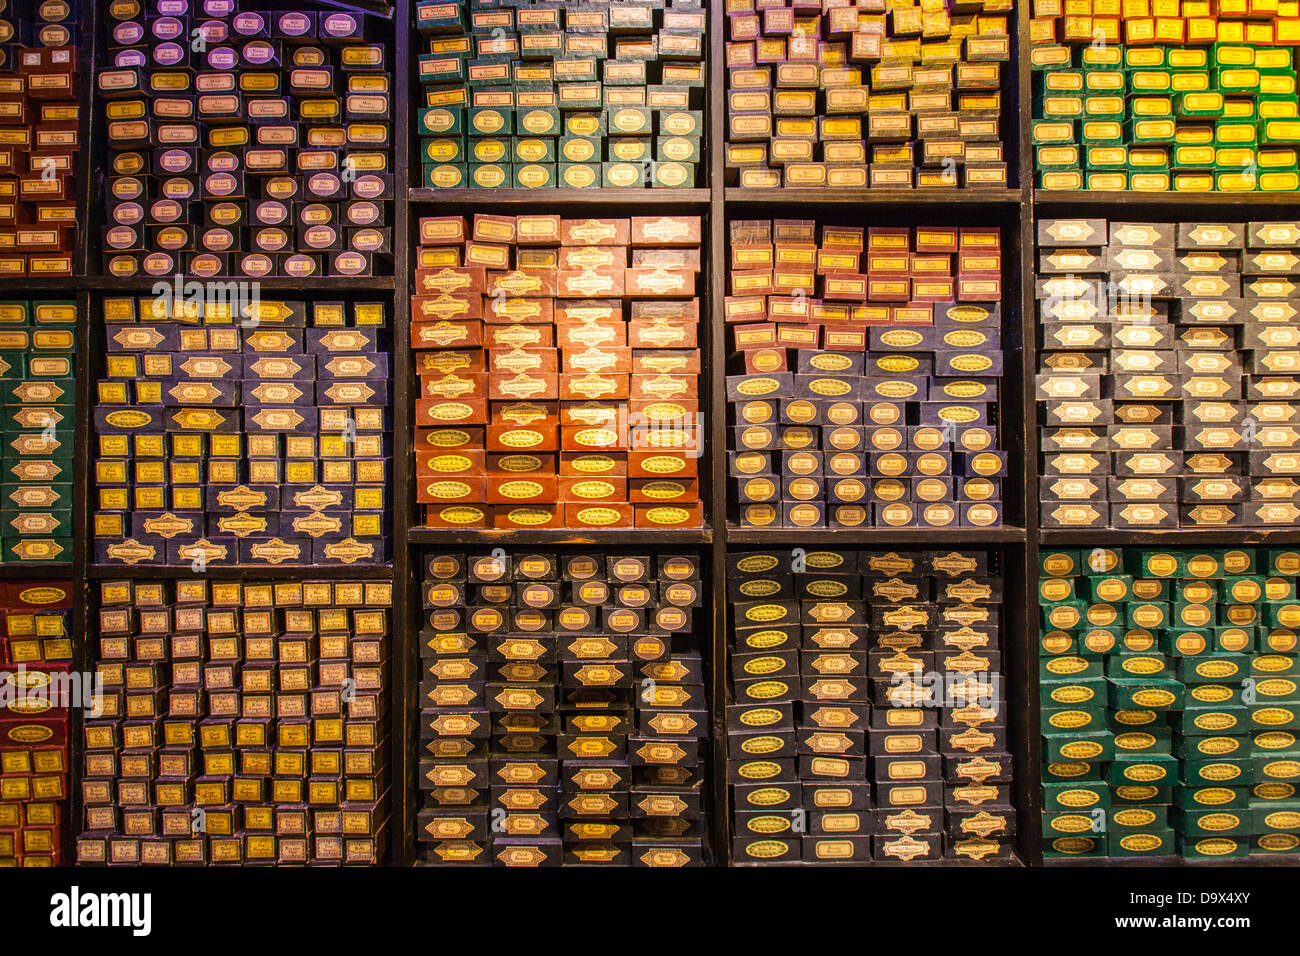 Harry Potter Wand boxes for sale Stock Photo - Alamy